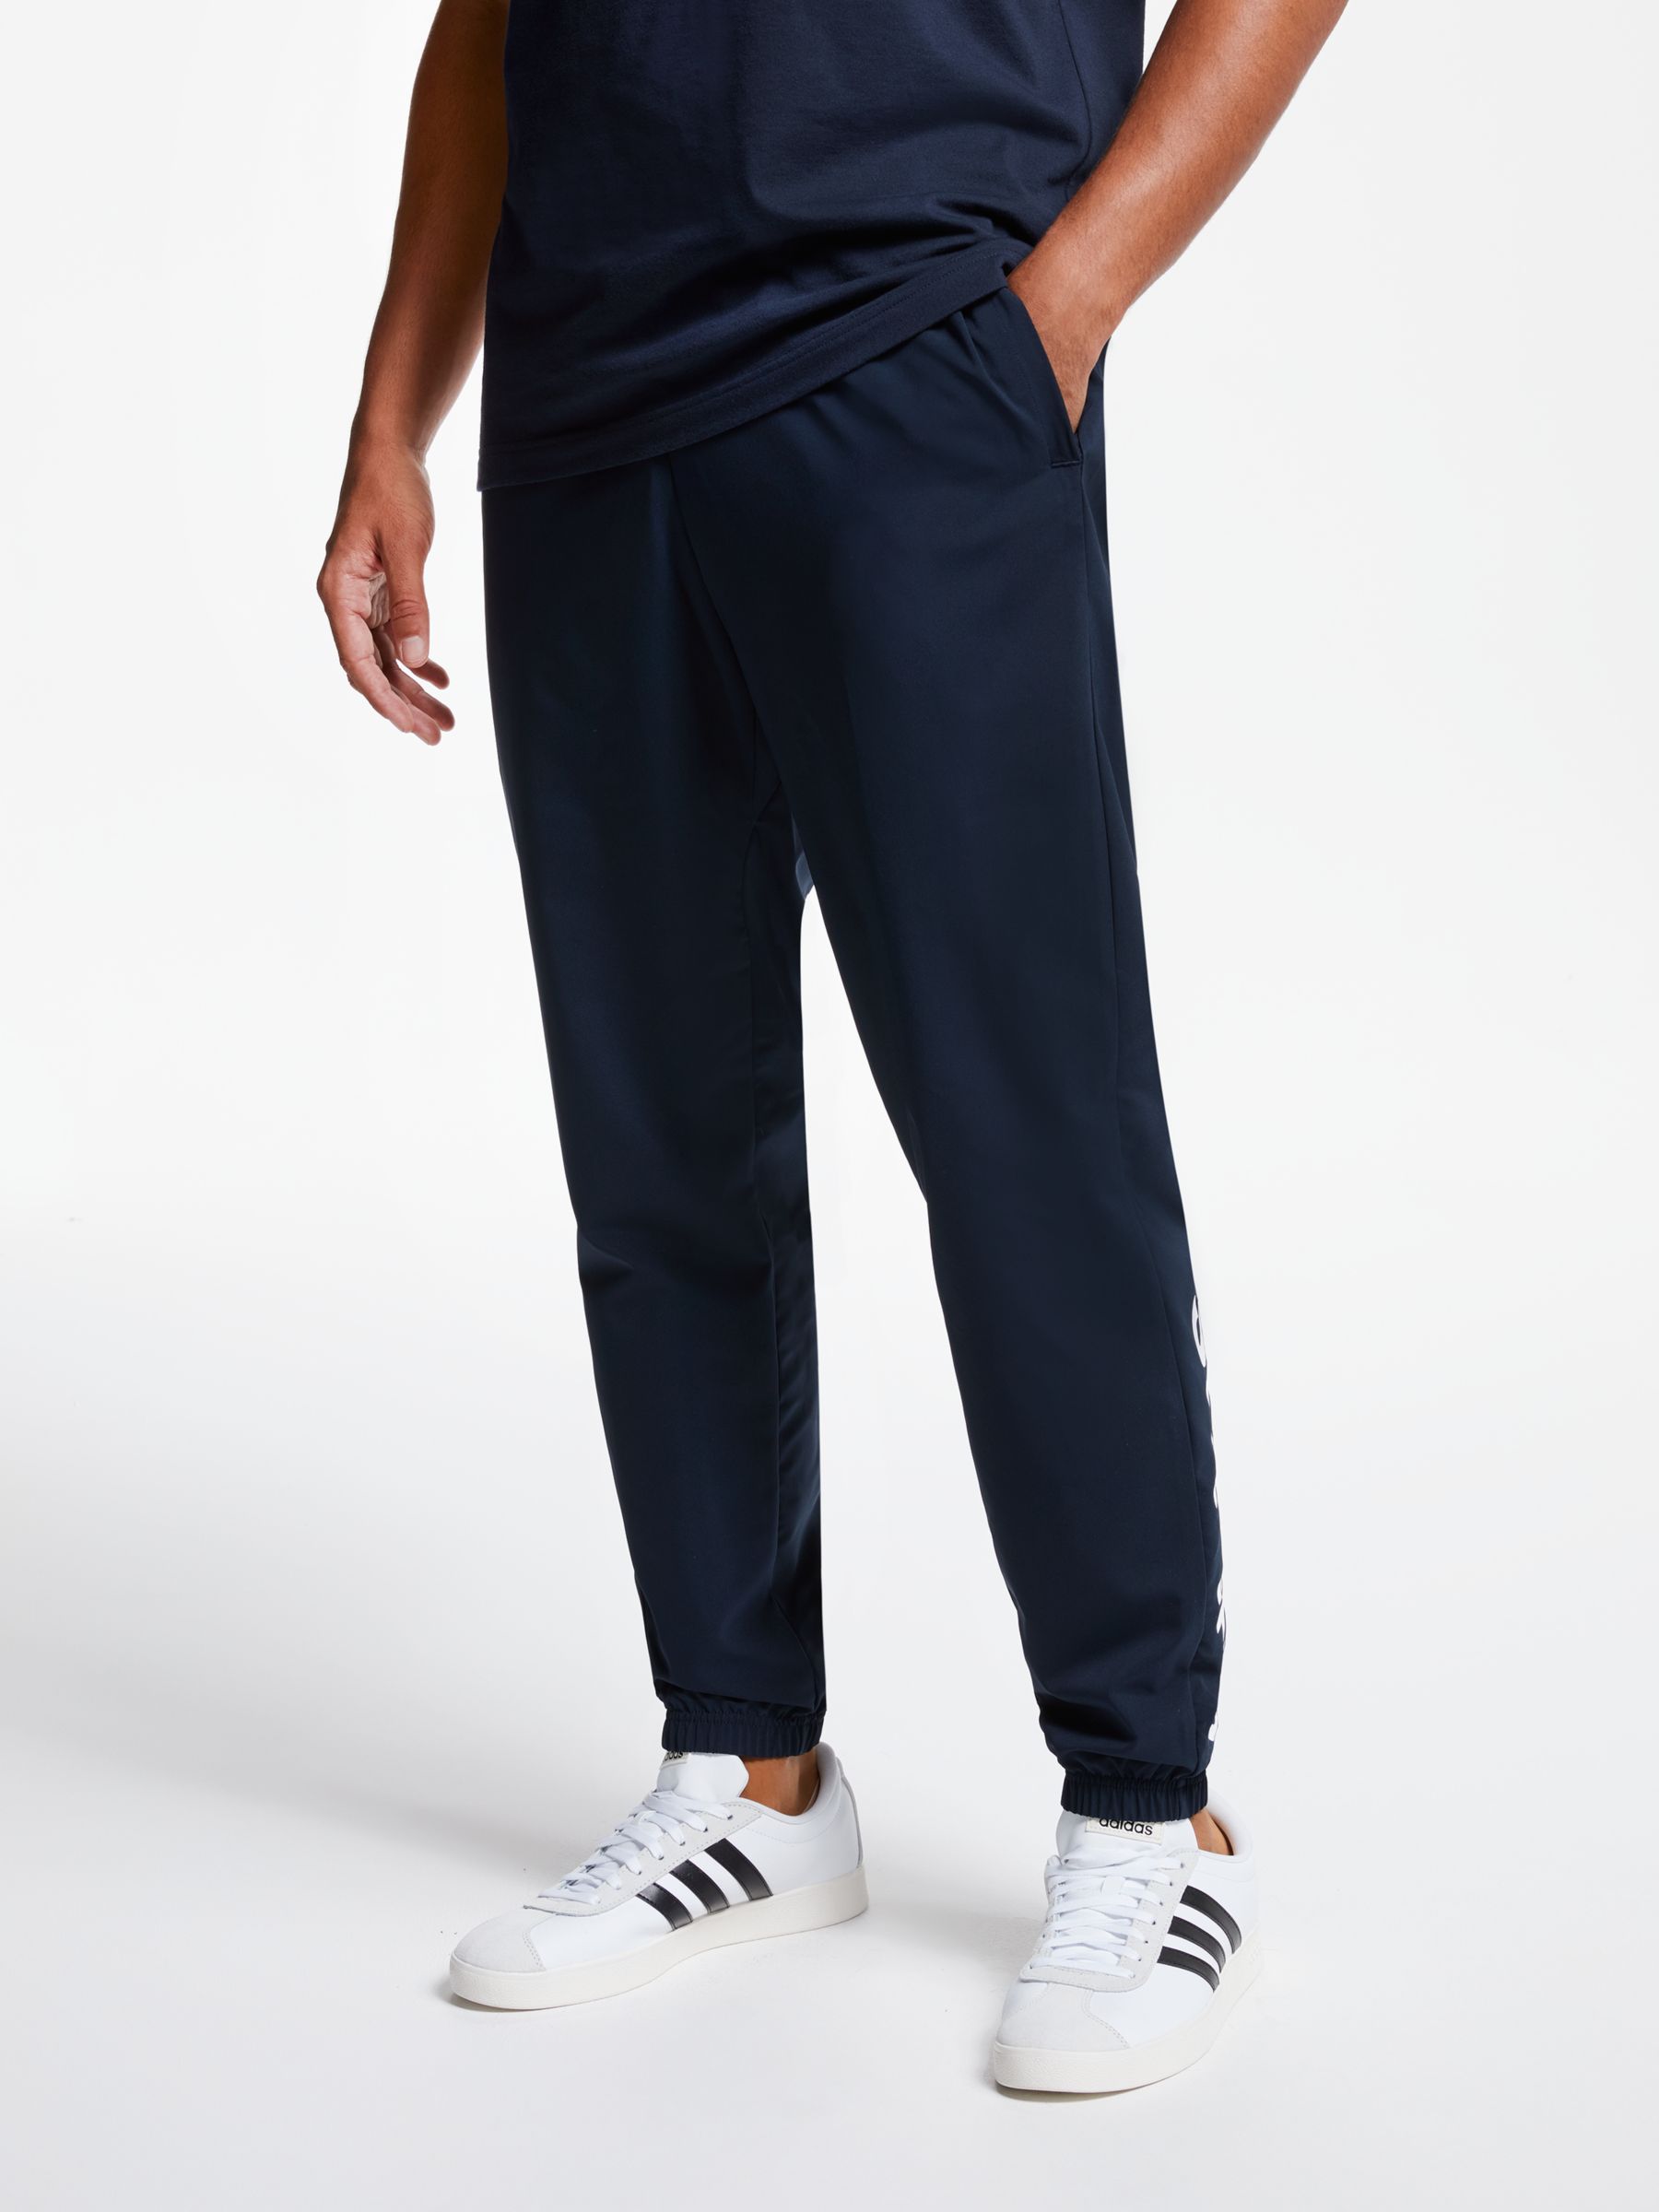 adidas stanford tracksuit bottoms